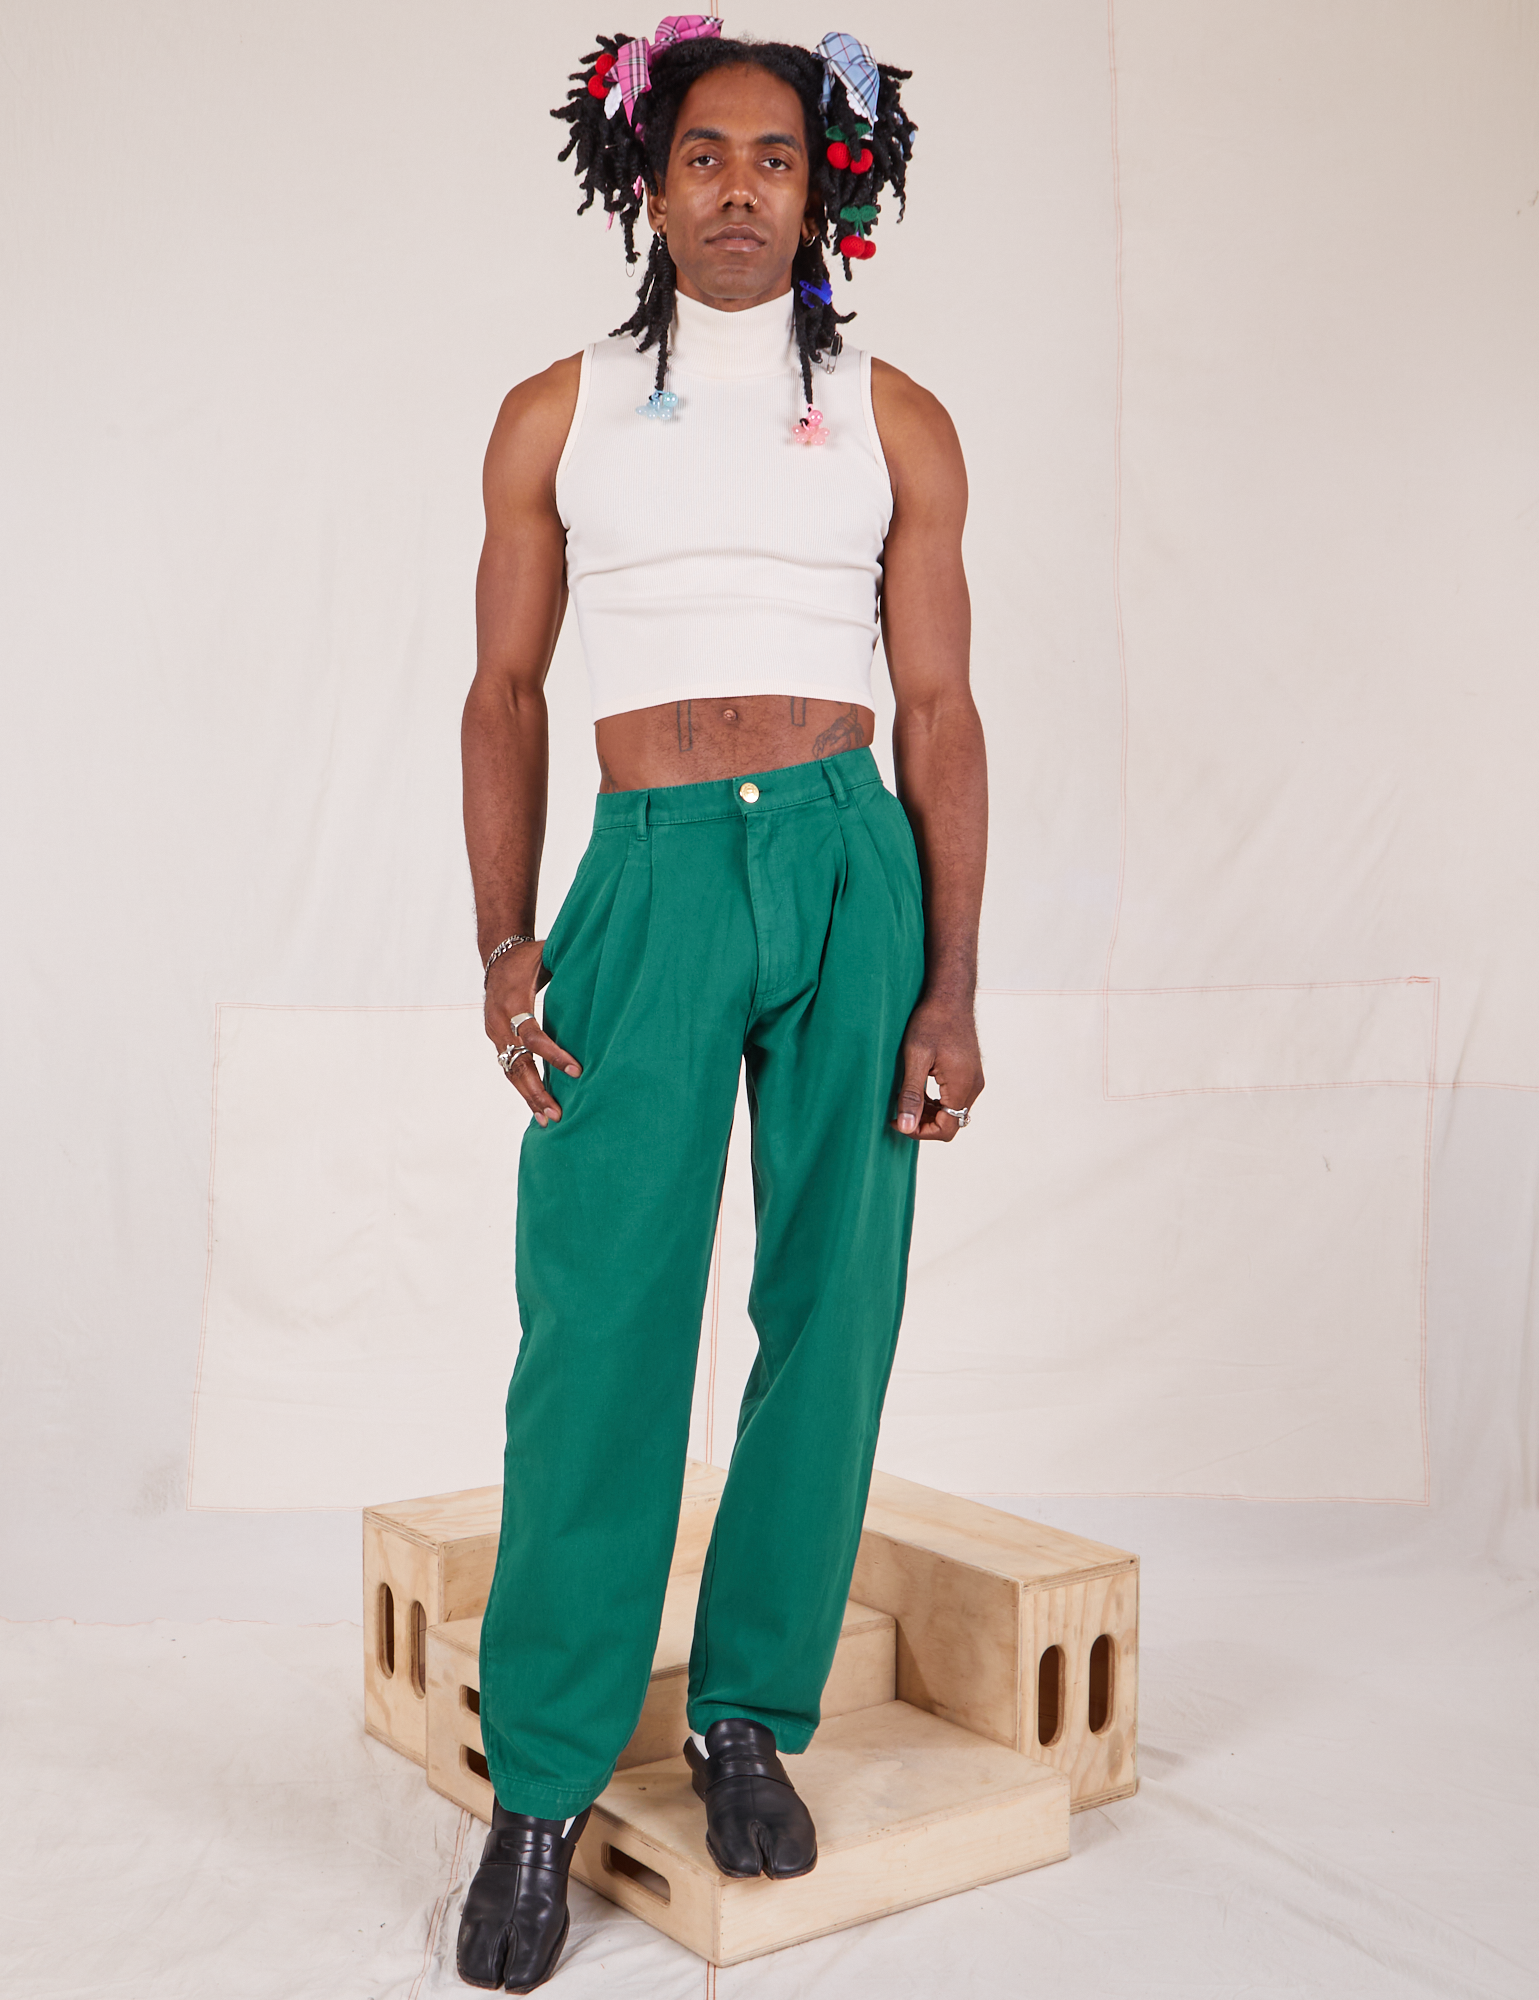 Jerrod is 6&#39;3&quot; and wearing S Long Heavyweight Trousers in Hunter Green paired with vintage off-white Sleeveless Turtleneck